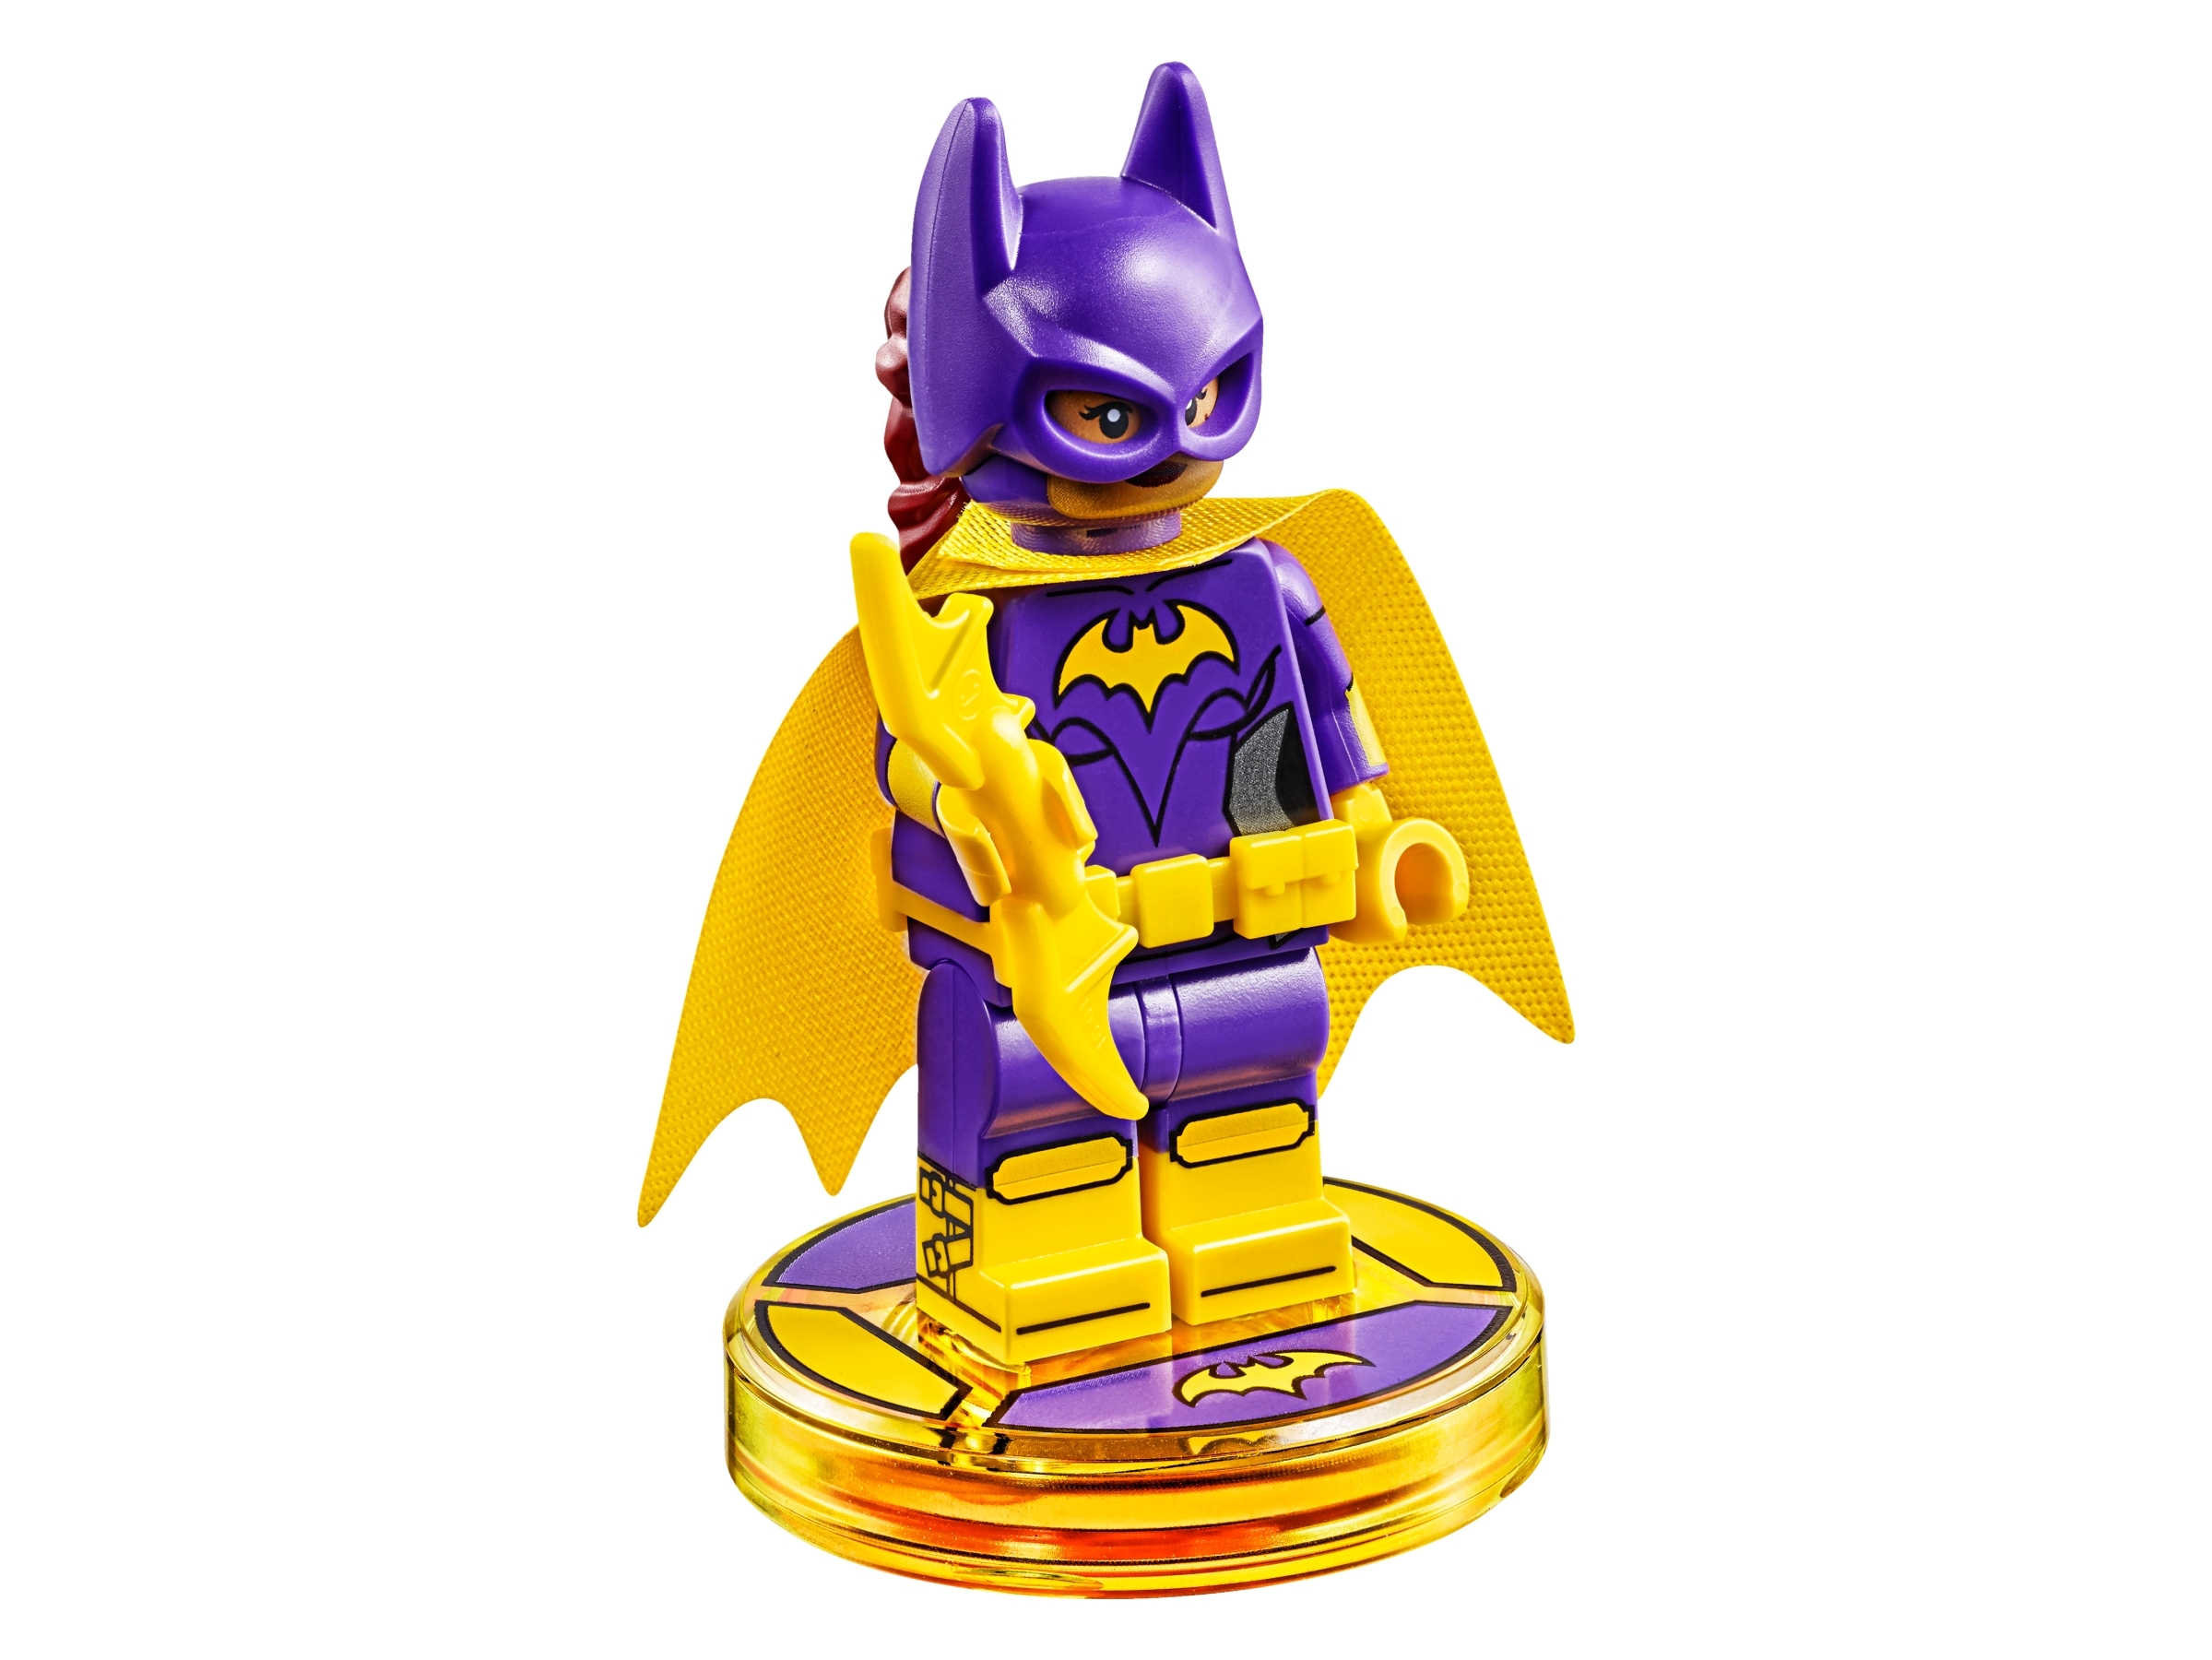 LEGO Dimensions The LEGO Batman Movie Story Pack  - Best Buy